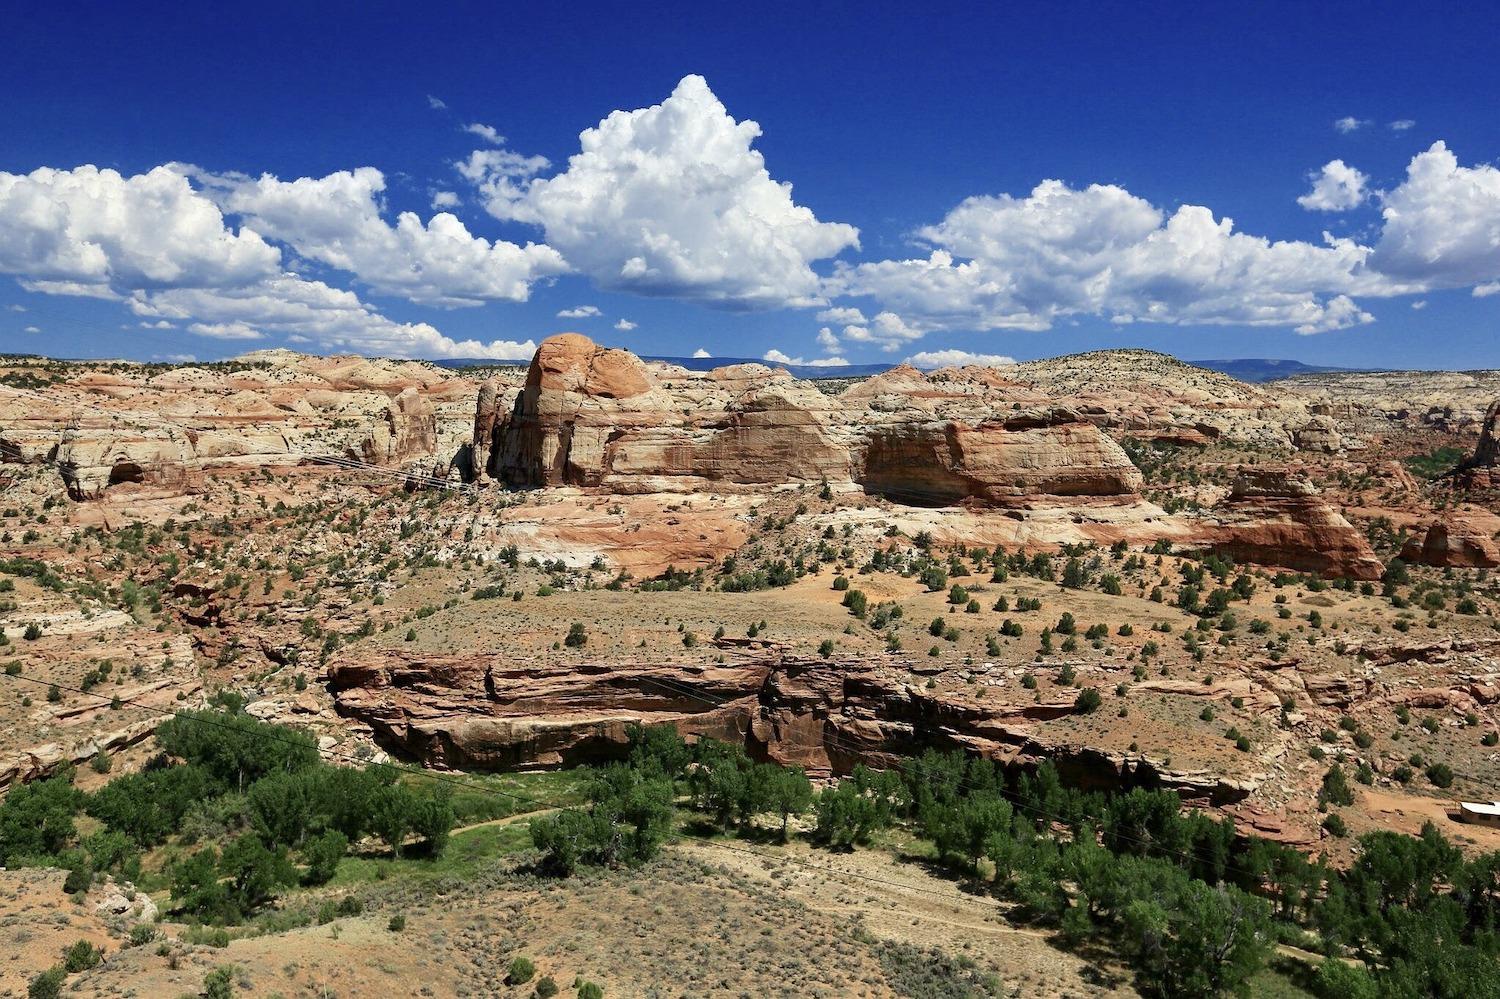 Reaction to President Biden's decision to restore the original boundaries for Grand Staircase-Escalante (above) and Bears Ears national monuments in Utah was predictable/Vit Ducken via Pixabay